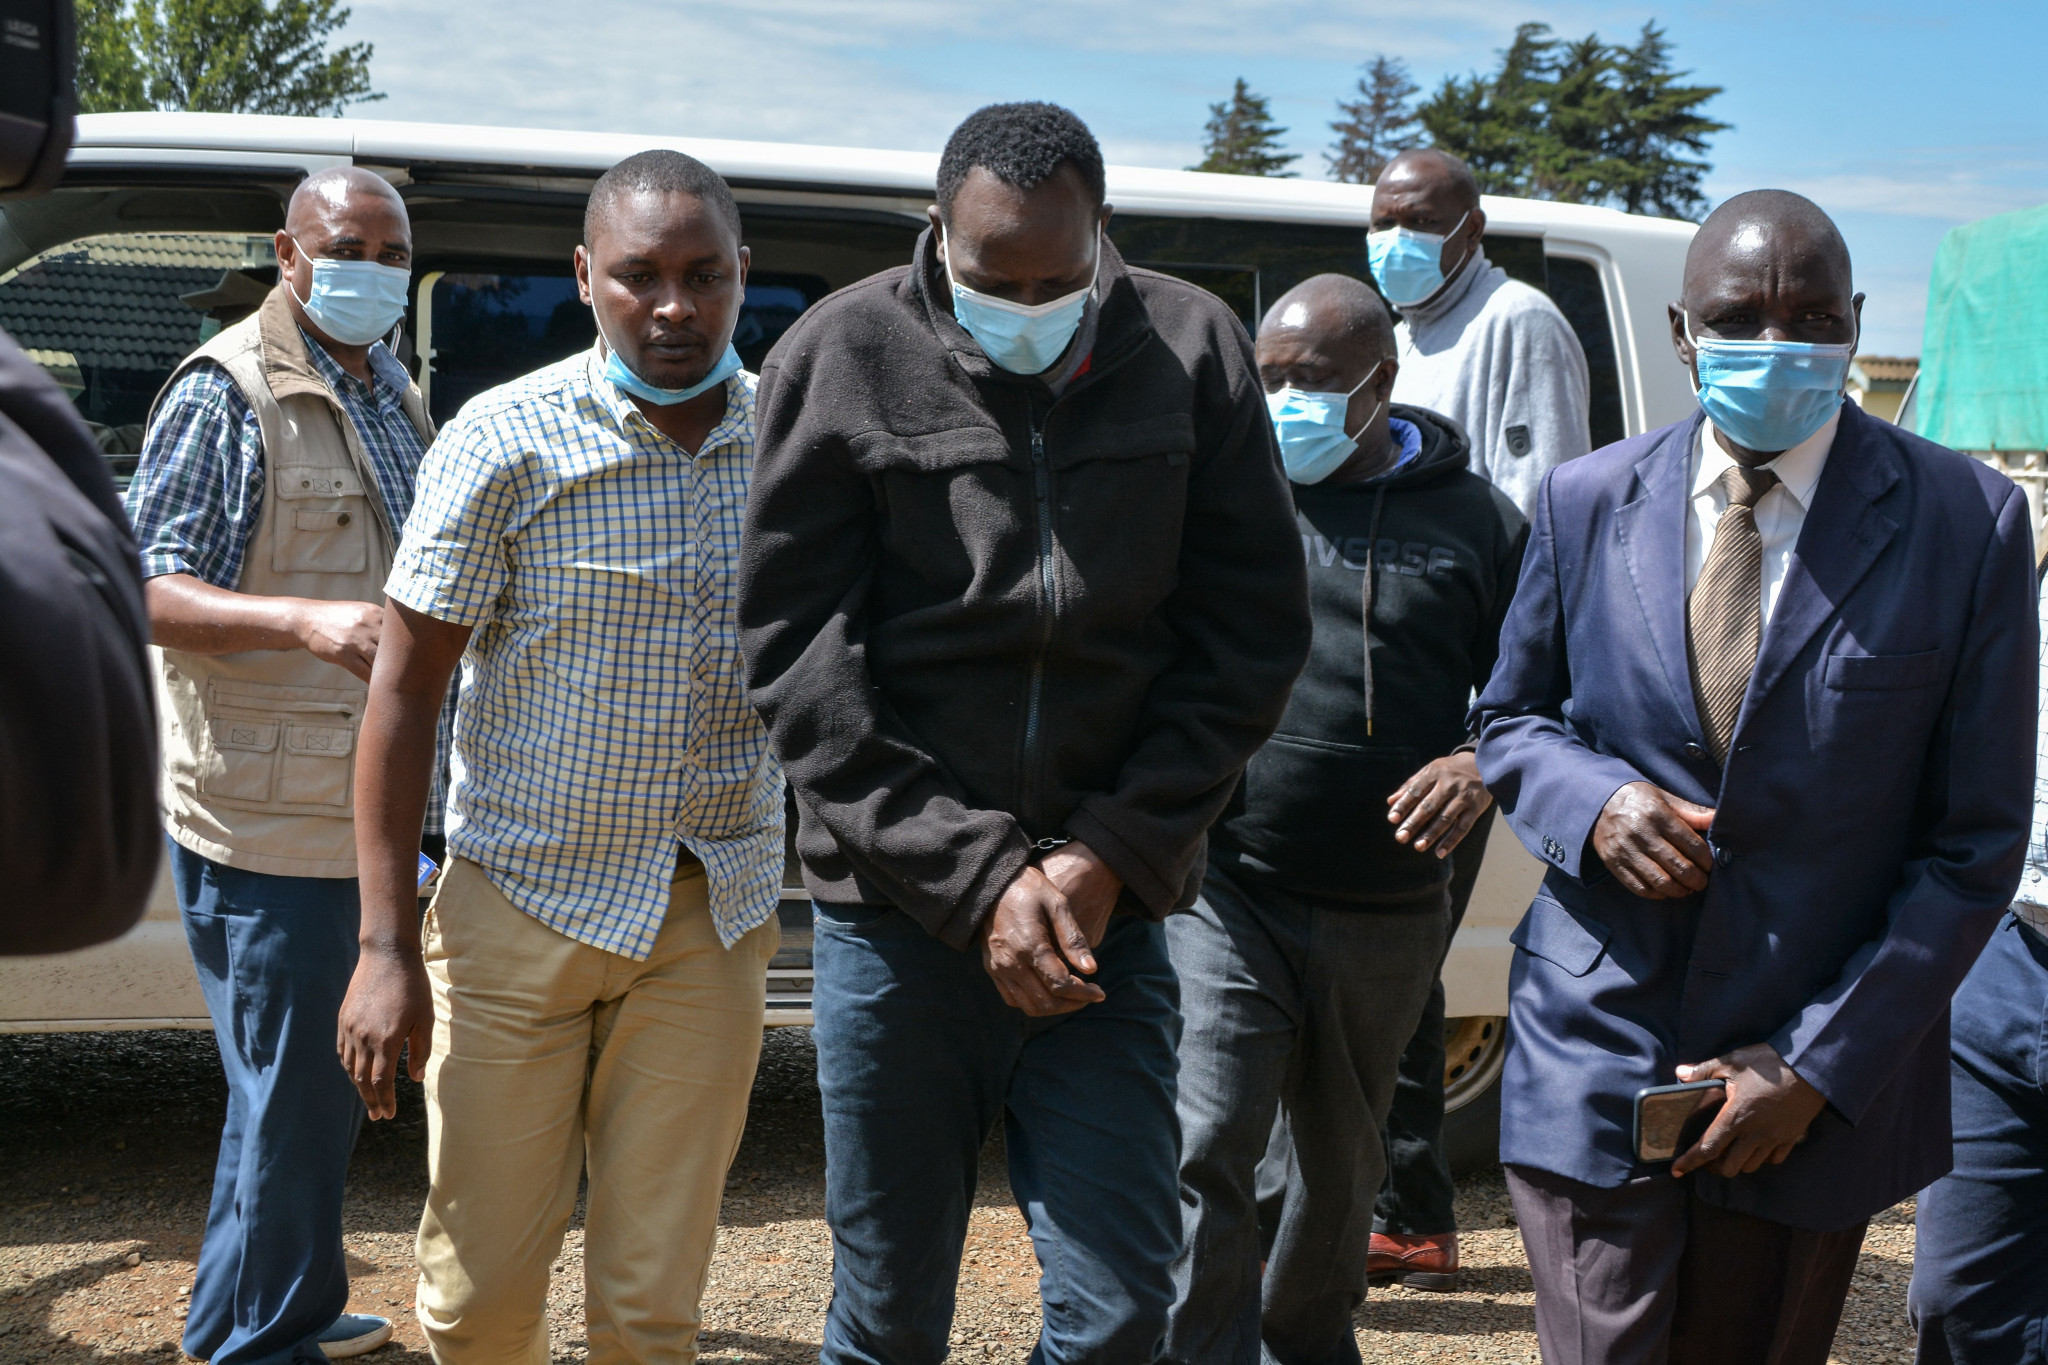 Rotich charged with murder of 10km world record holder Tirop, but pleads not guilty